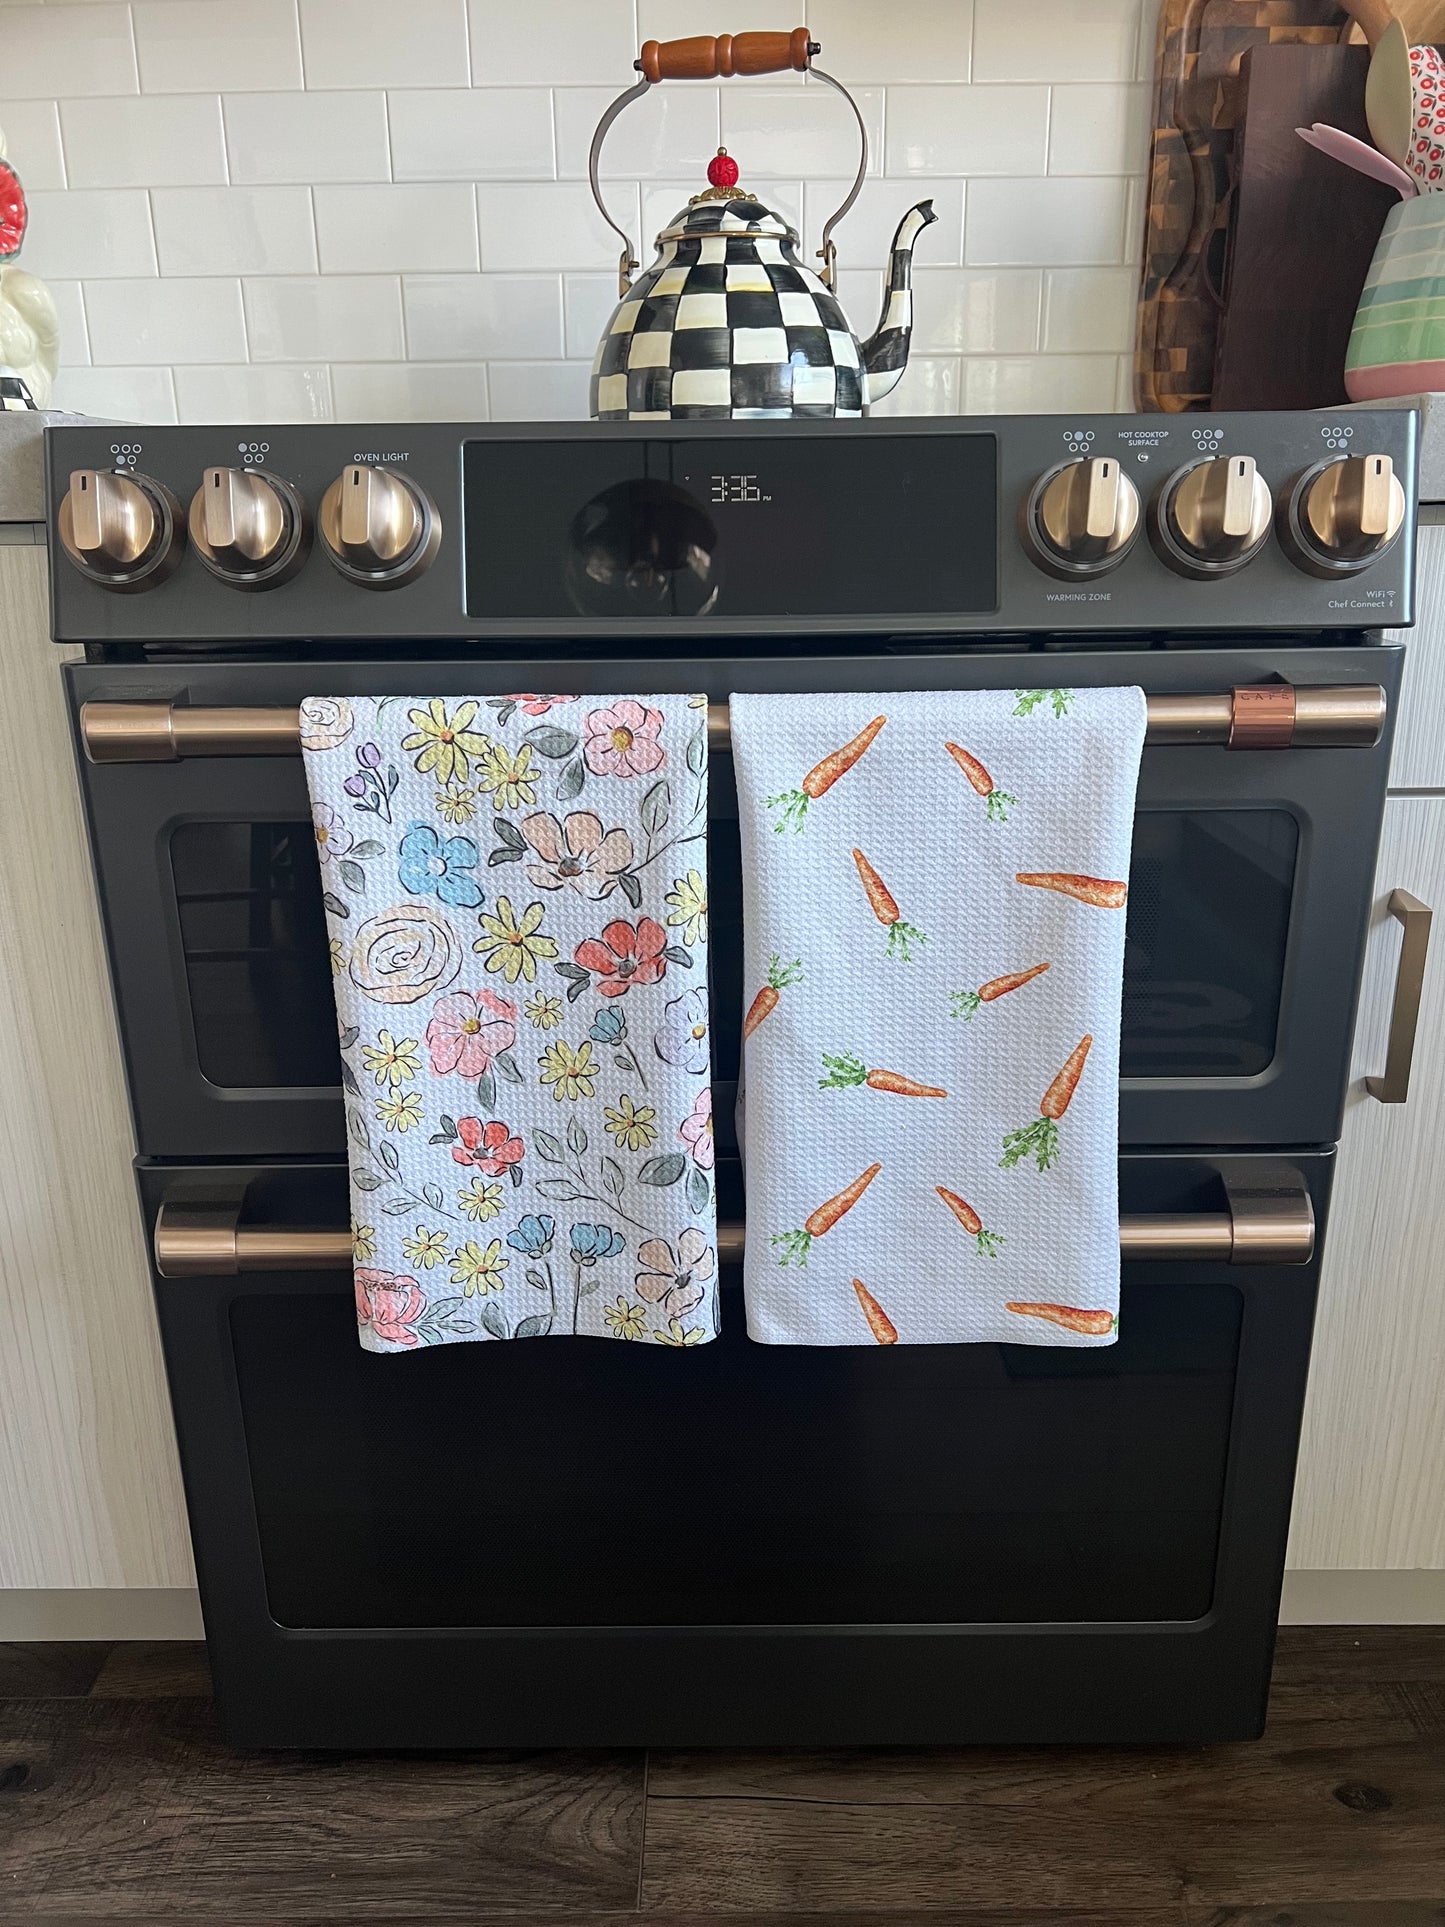 Room for Flowers: Single-Sided Hand Towel